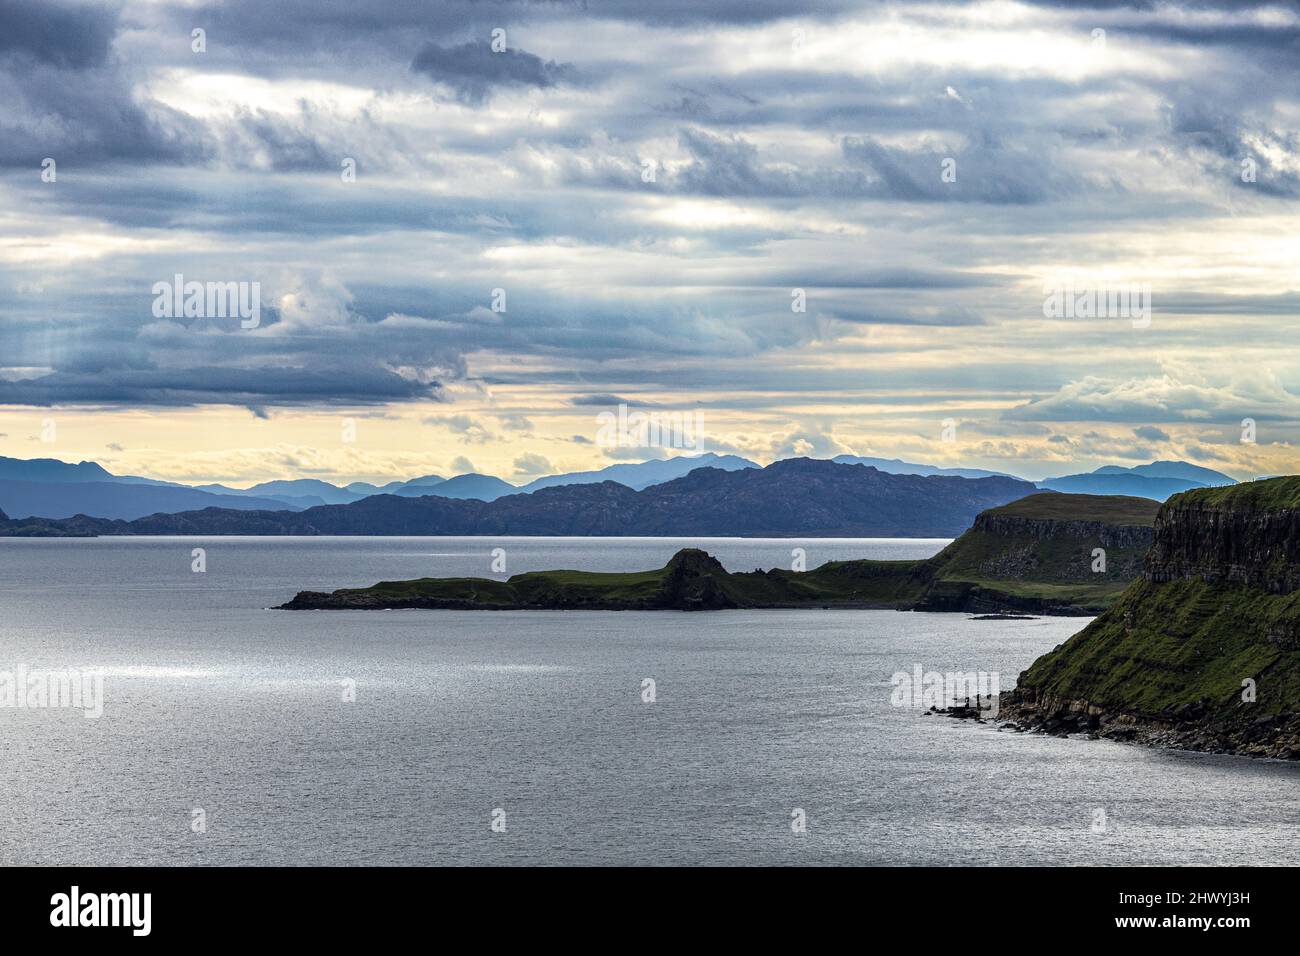 A view towards the Scottish mainland from the north east coast of the Isle of Skye, Highland, Scotland UK. The Isle of Rona is in the foreground. Stock Photo